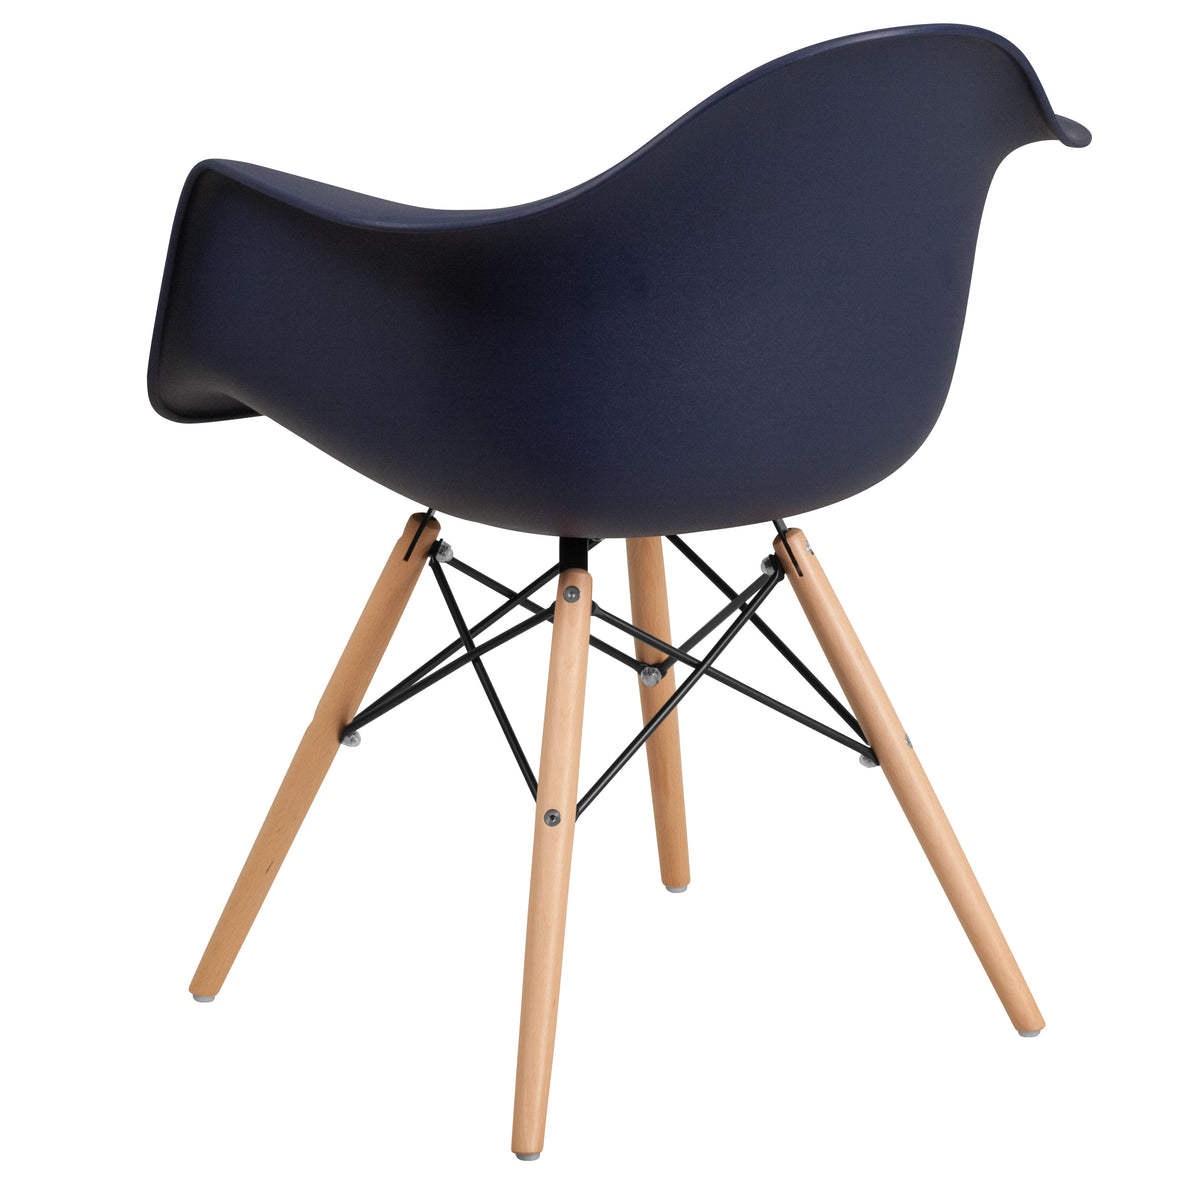 Navy |#| Navy Plastic Chair with Arms and Wooden Legs - Accent & Side Chair